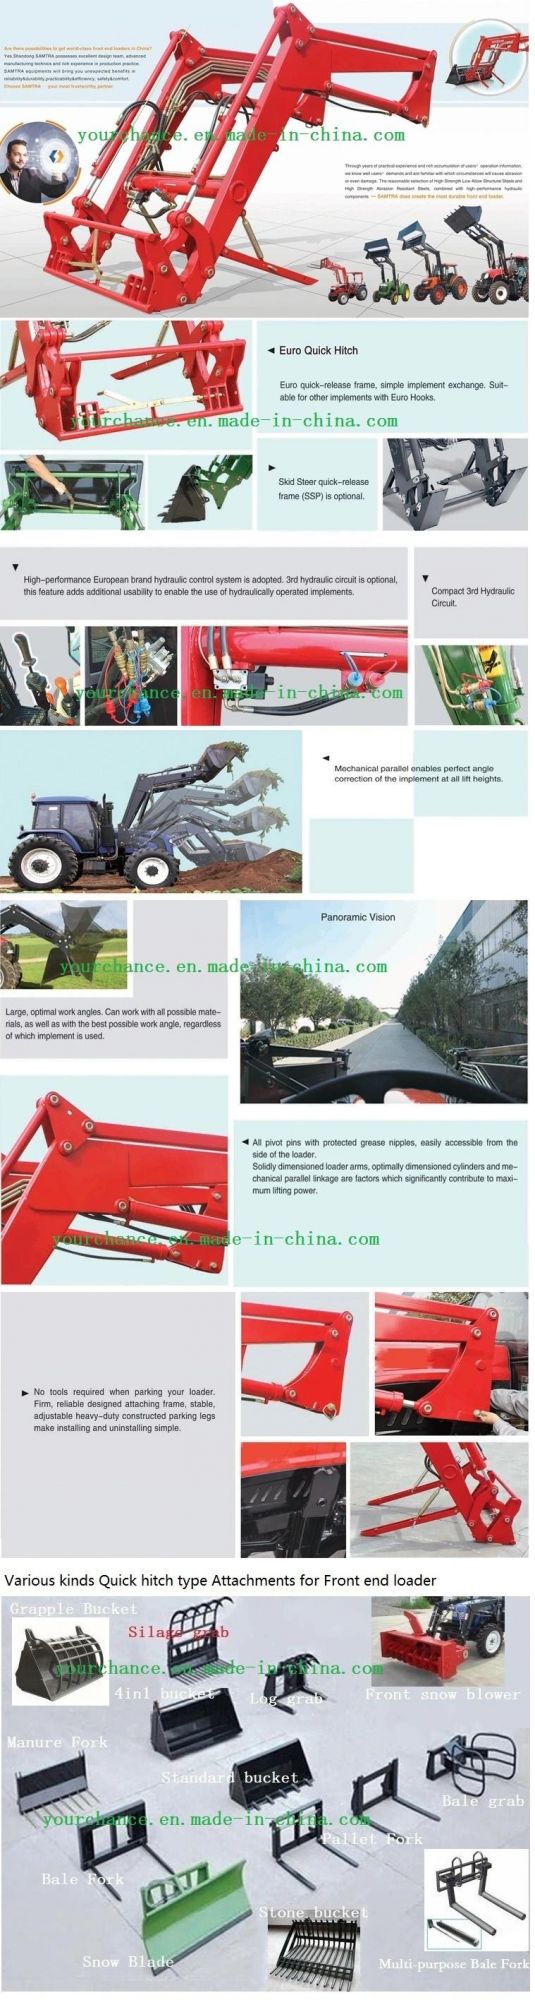 Tz04D China Tip Quality 30-55HP Wheel Farm Tractor Mounted Front End Loader Hot Sale in Philippines